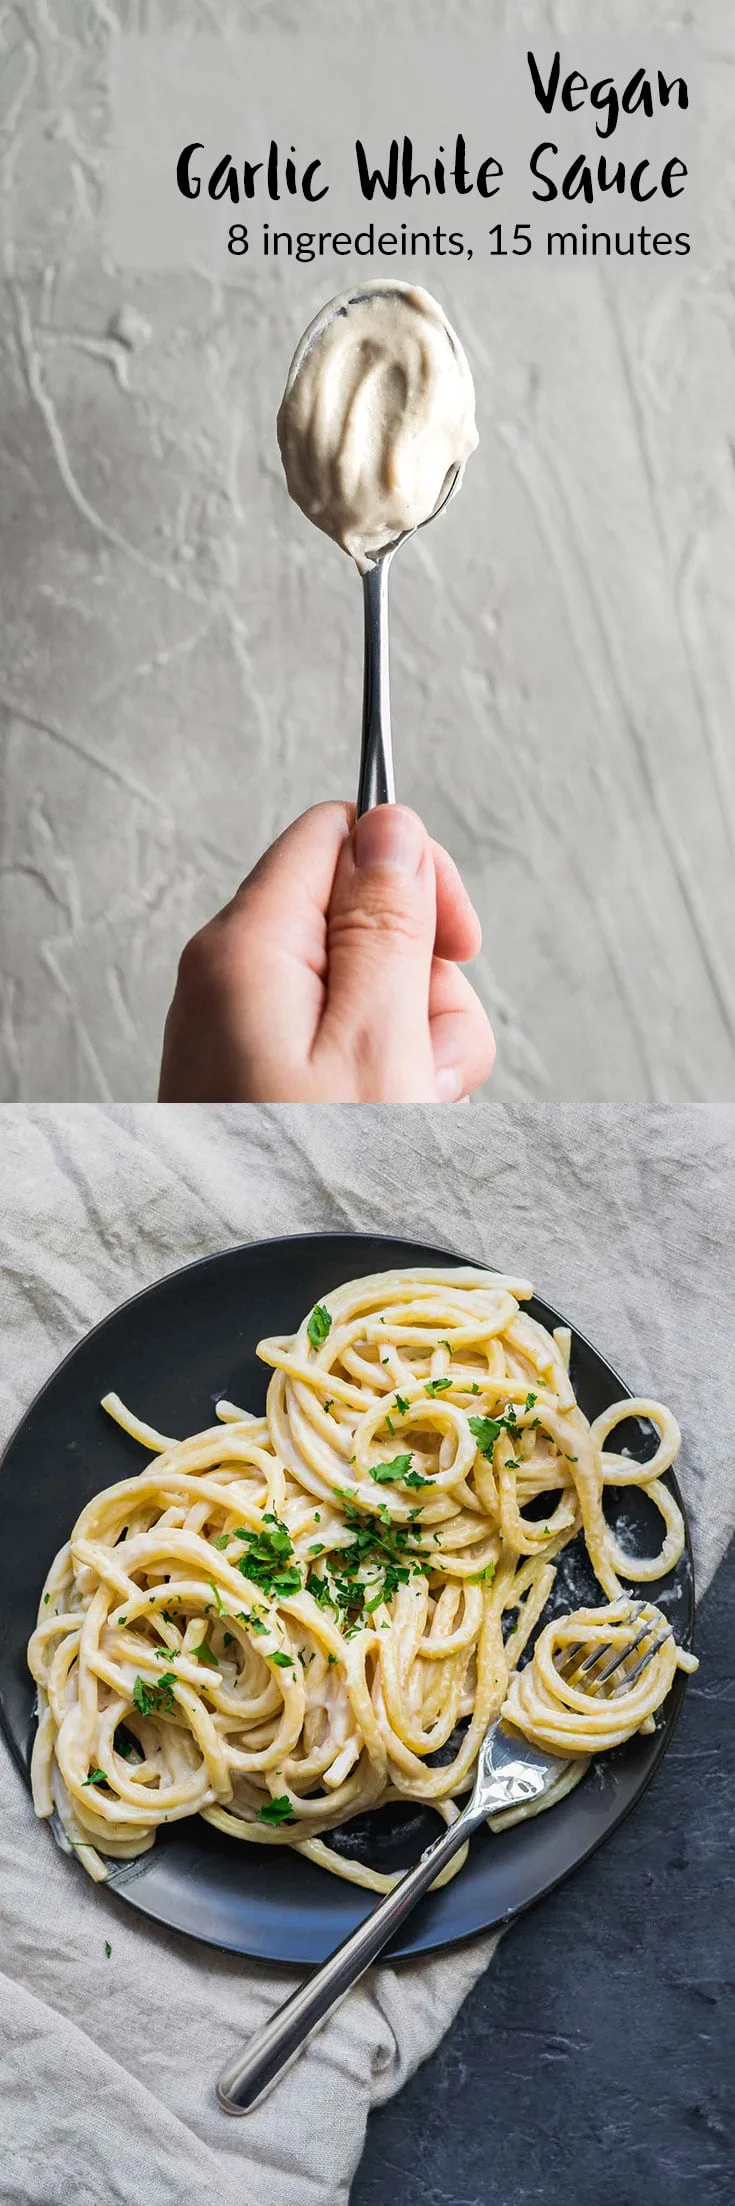 Vegan Garlic White Sauce | A creamy white sauce that's perfect as a base on pizza, as a sauce for pasta, or a dressing for a bowl-style meal, and more! A cashew cream and roux-based vegan sauce. With gluten free and nut free options. | thecuriouschickpea.com #vegan #vegansauce #garlicsauce